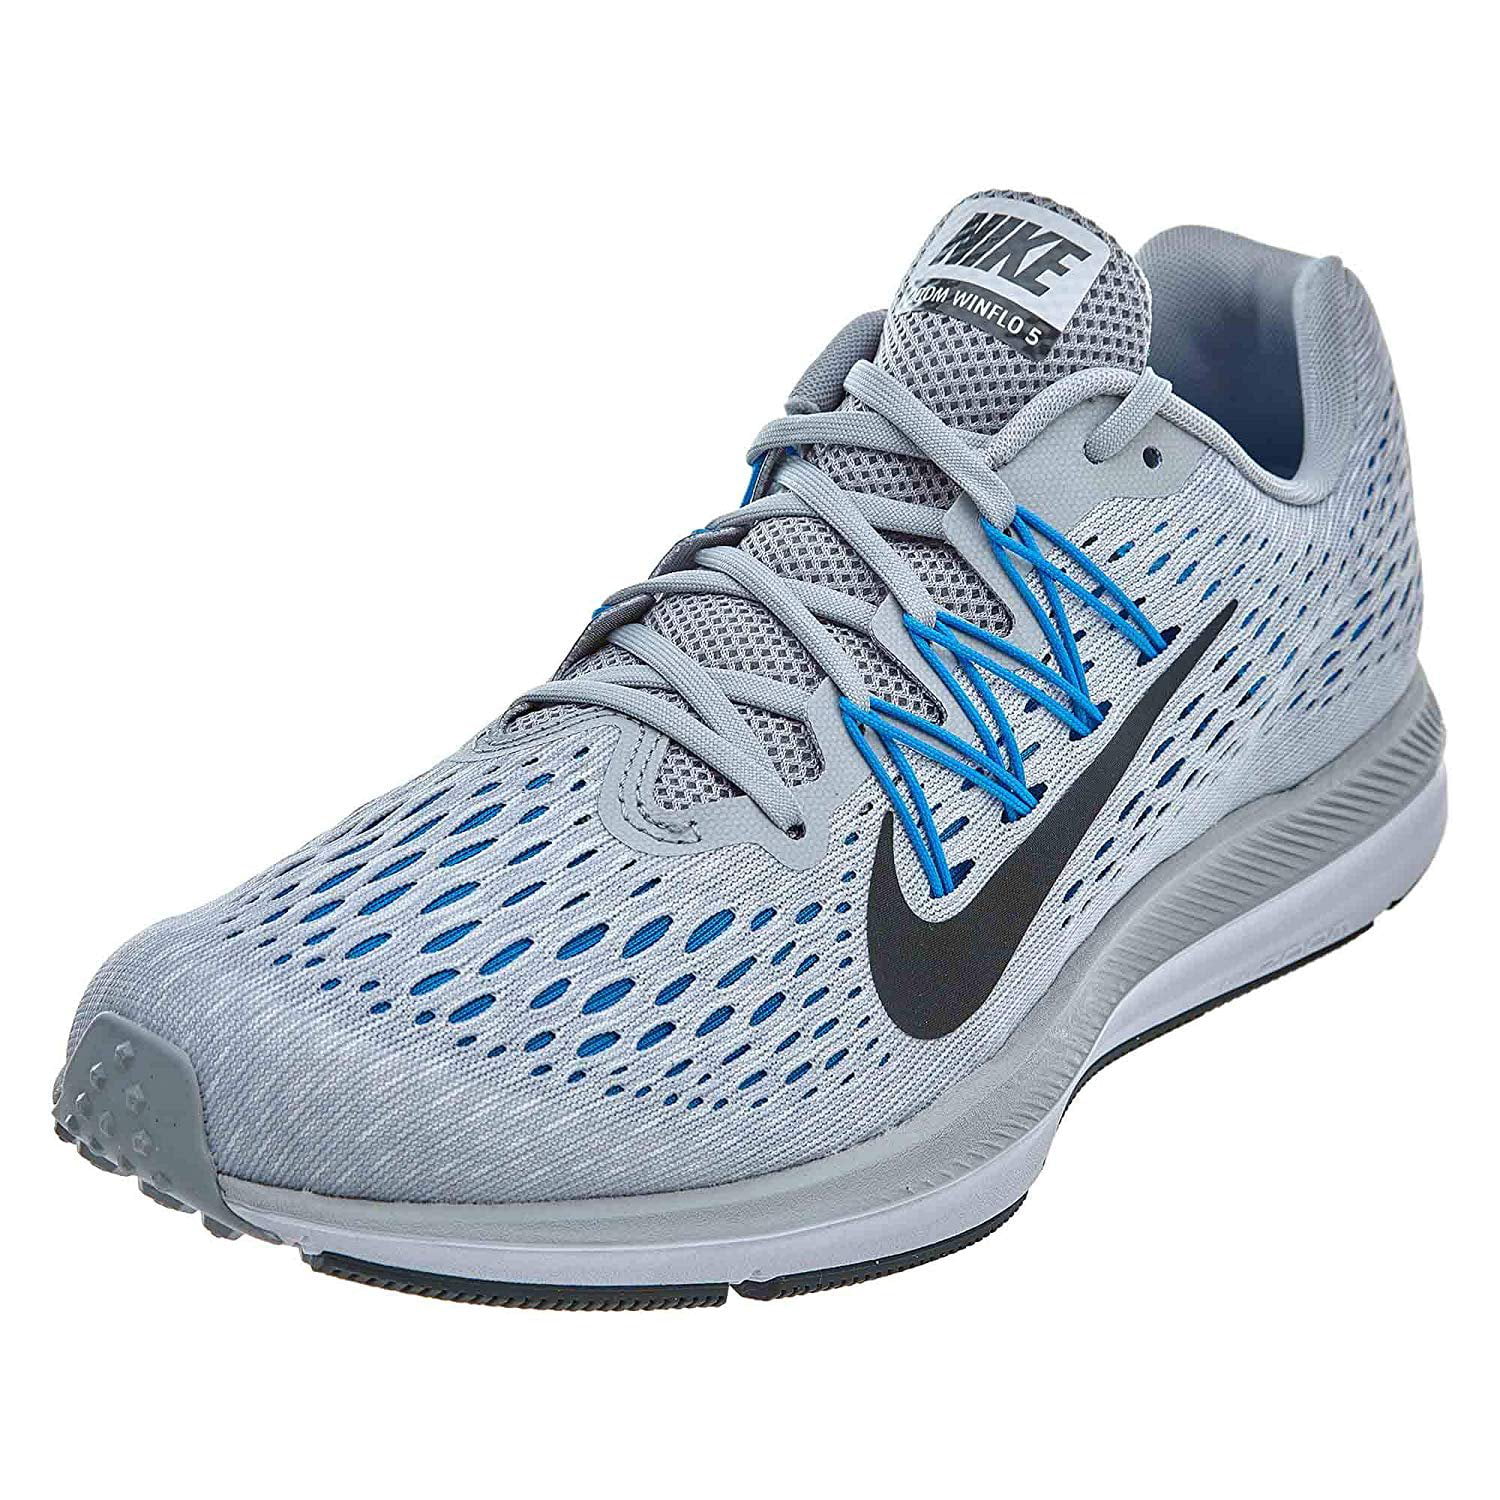 Nike Zoom Winflo 5 [AA7406-003] Men Running Shoes Wolf Grey/Anthracite ...